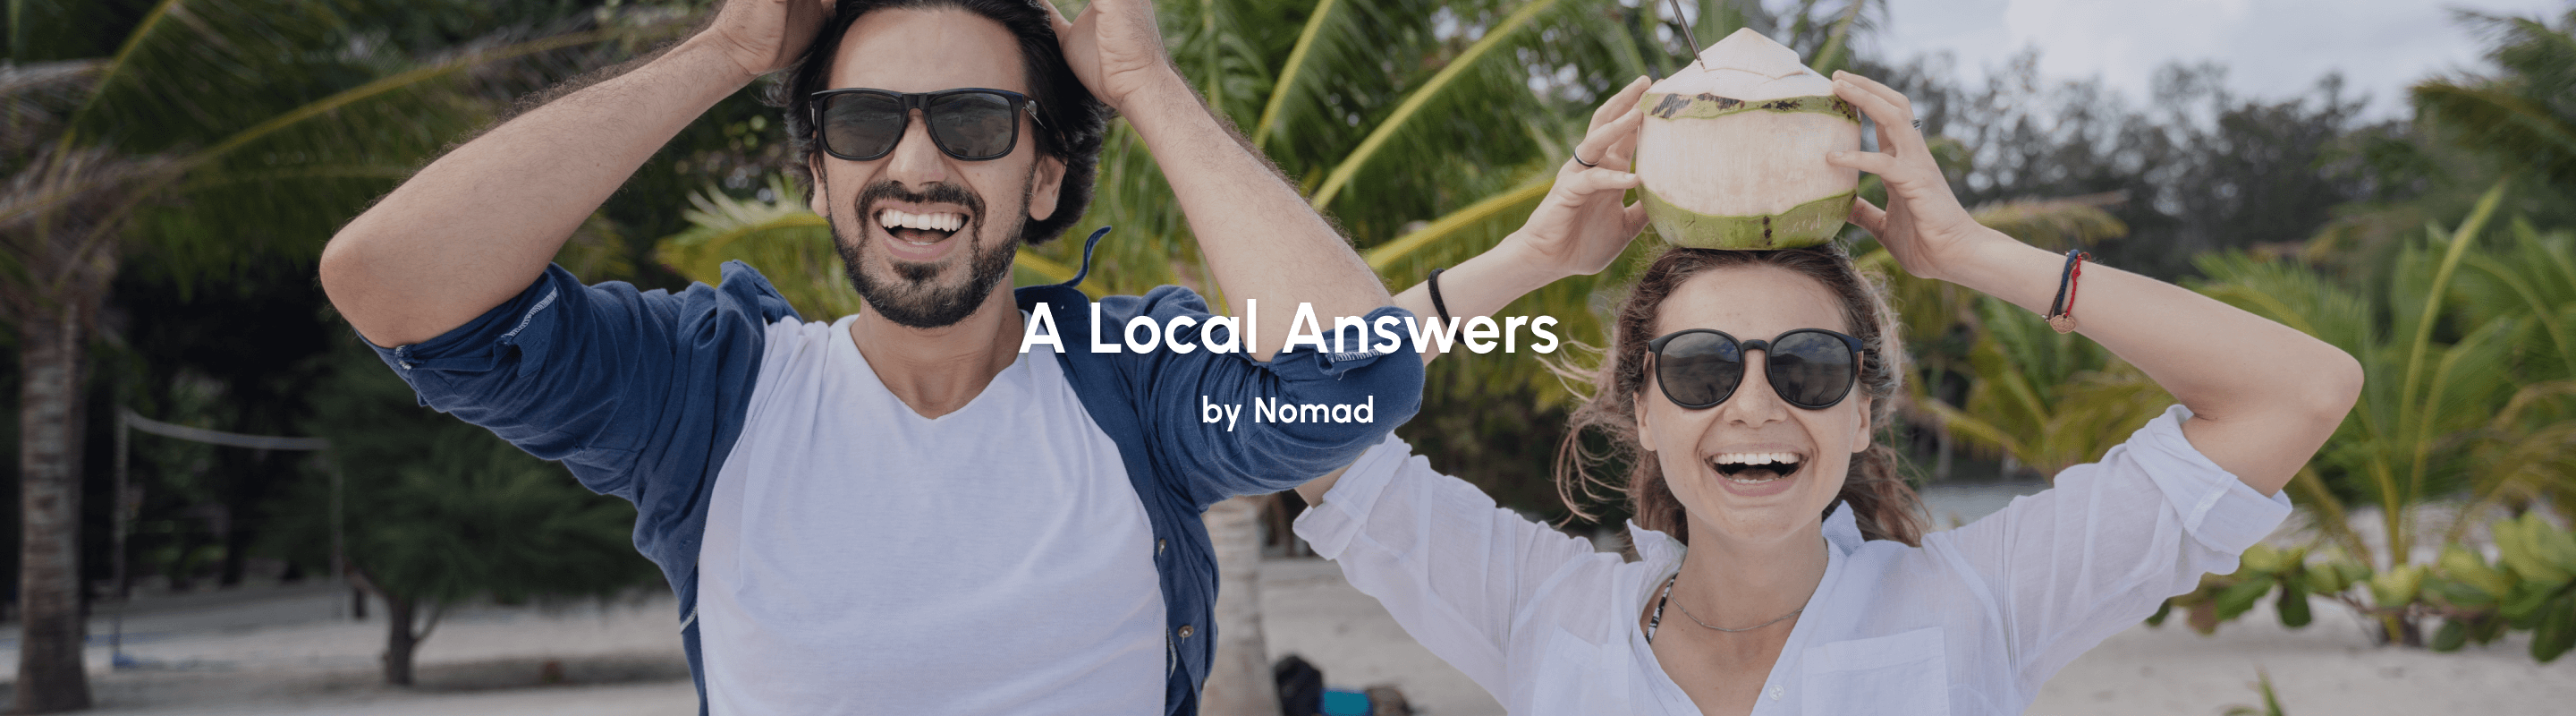 A Local Answers by Nomad